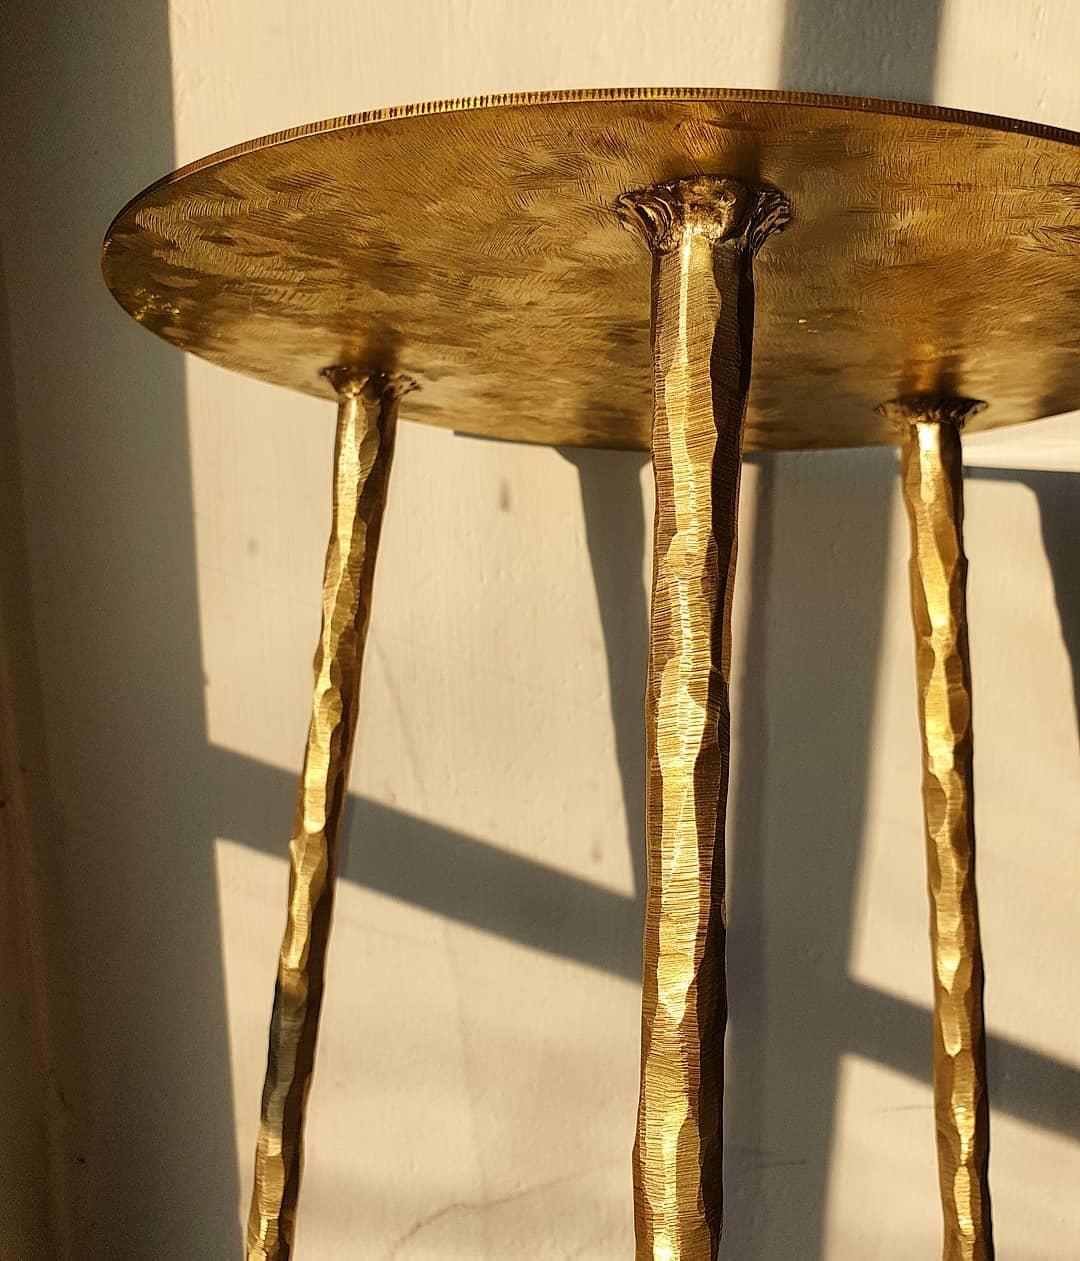 Brass side table signed by Lukasz Friedrich
Side rable „Drops”
Materials: Patinated, Carved Brass,
Dimensiosns:
D 40 cm H 55 cm
Can be made to order in other dimensions. Also available in brushed brass.
Signed and dated

Lukasz Friedrich